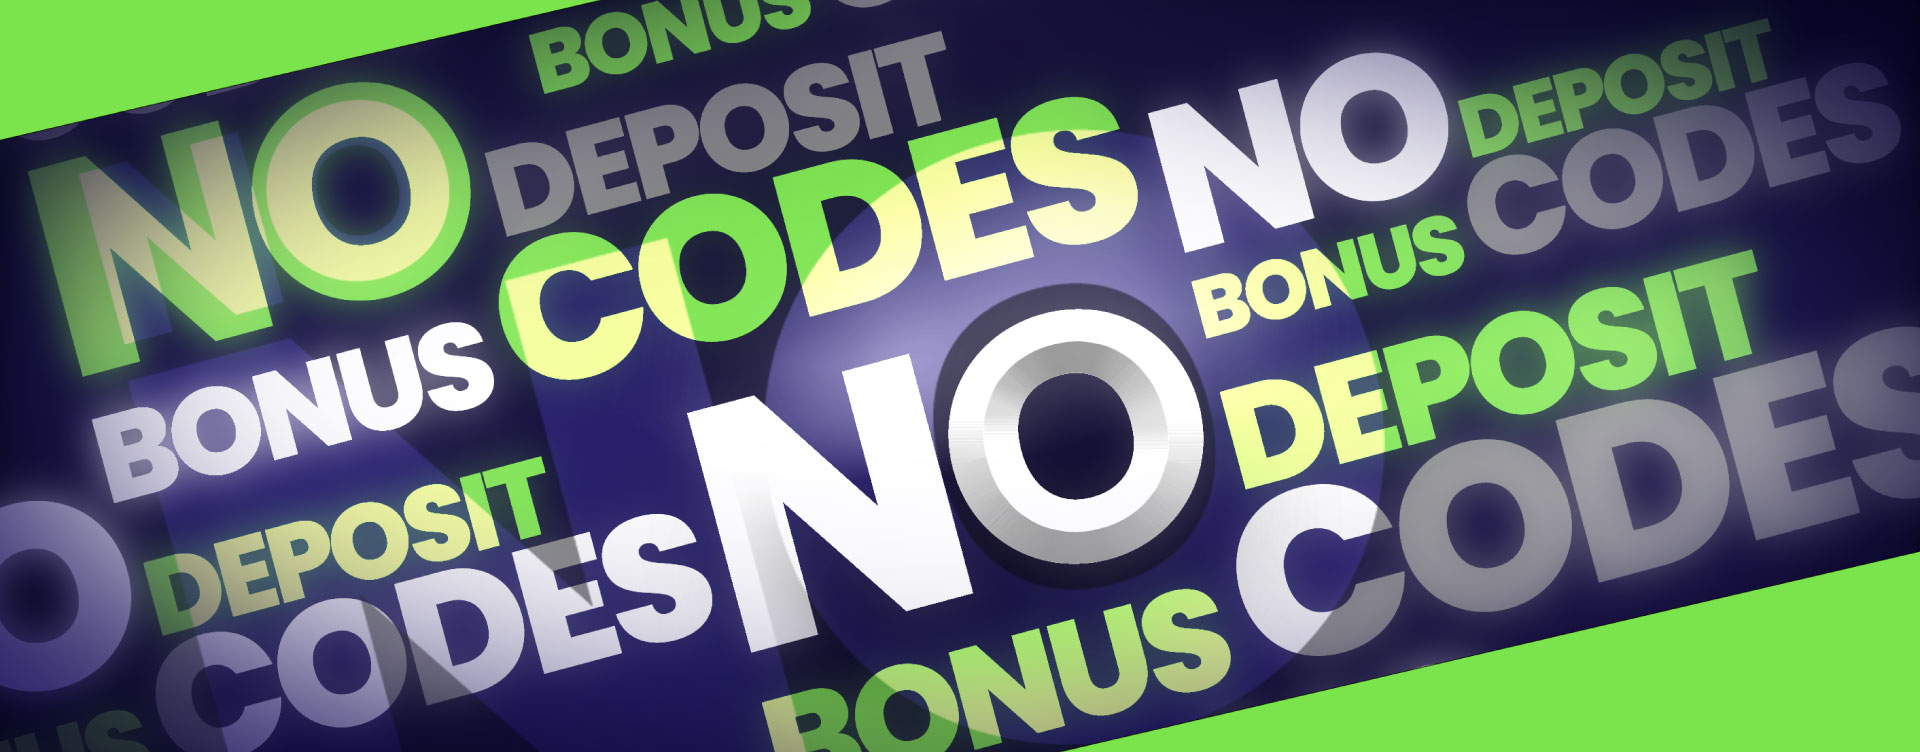 Find no deposit bonus codes and play for free!